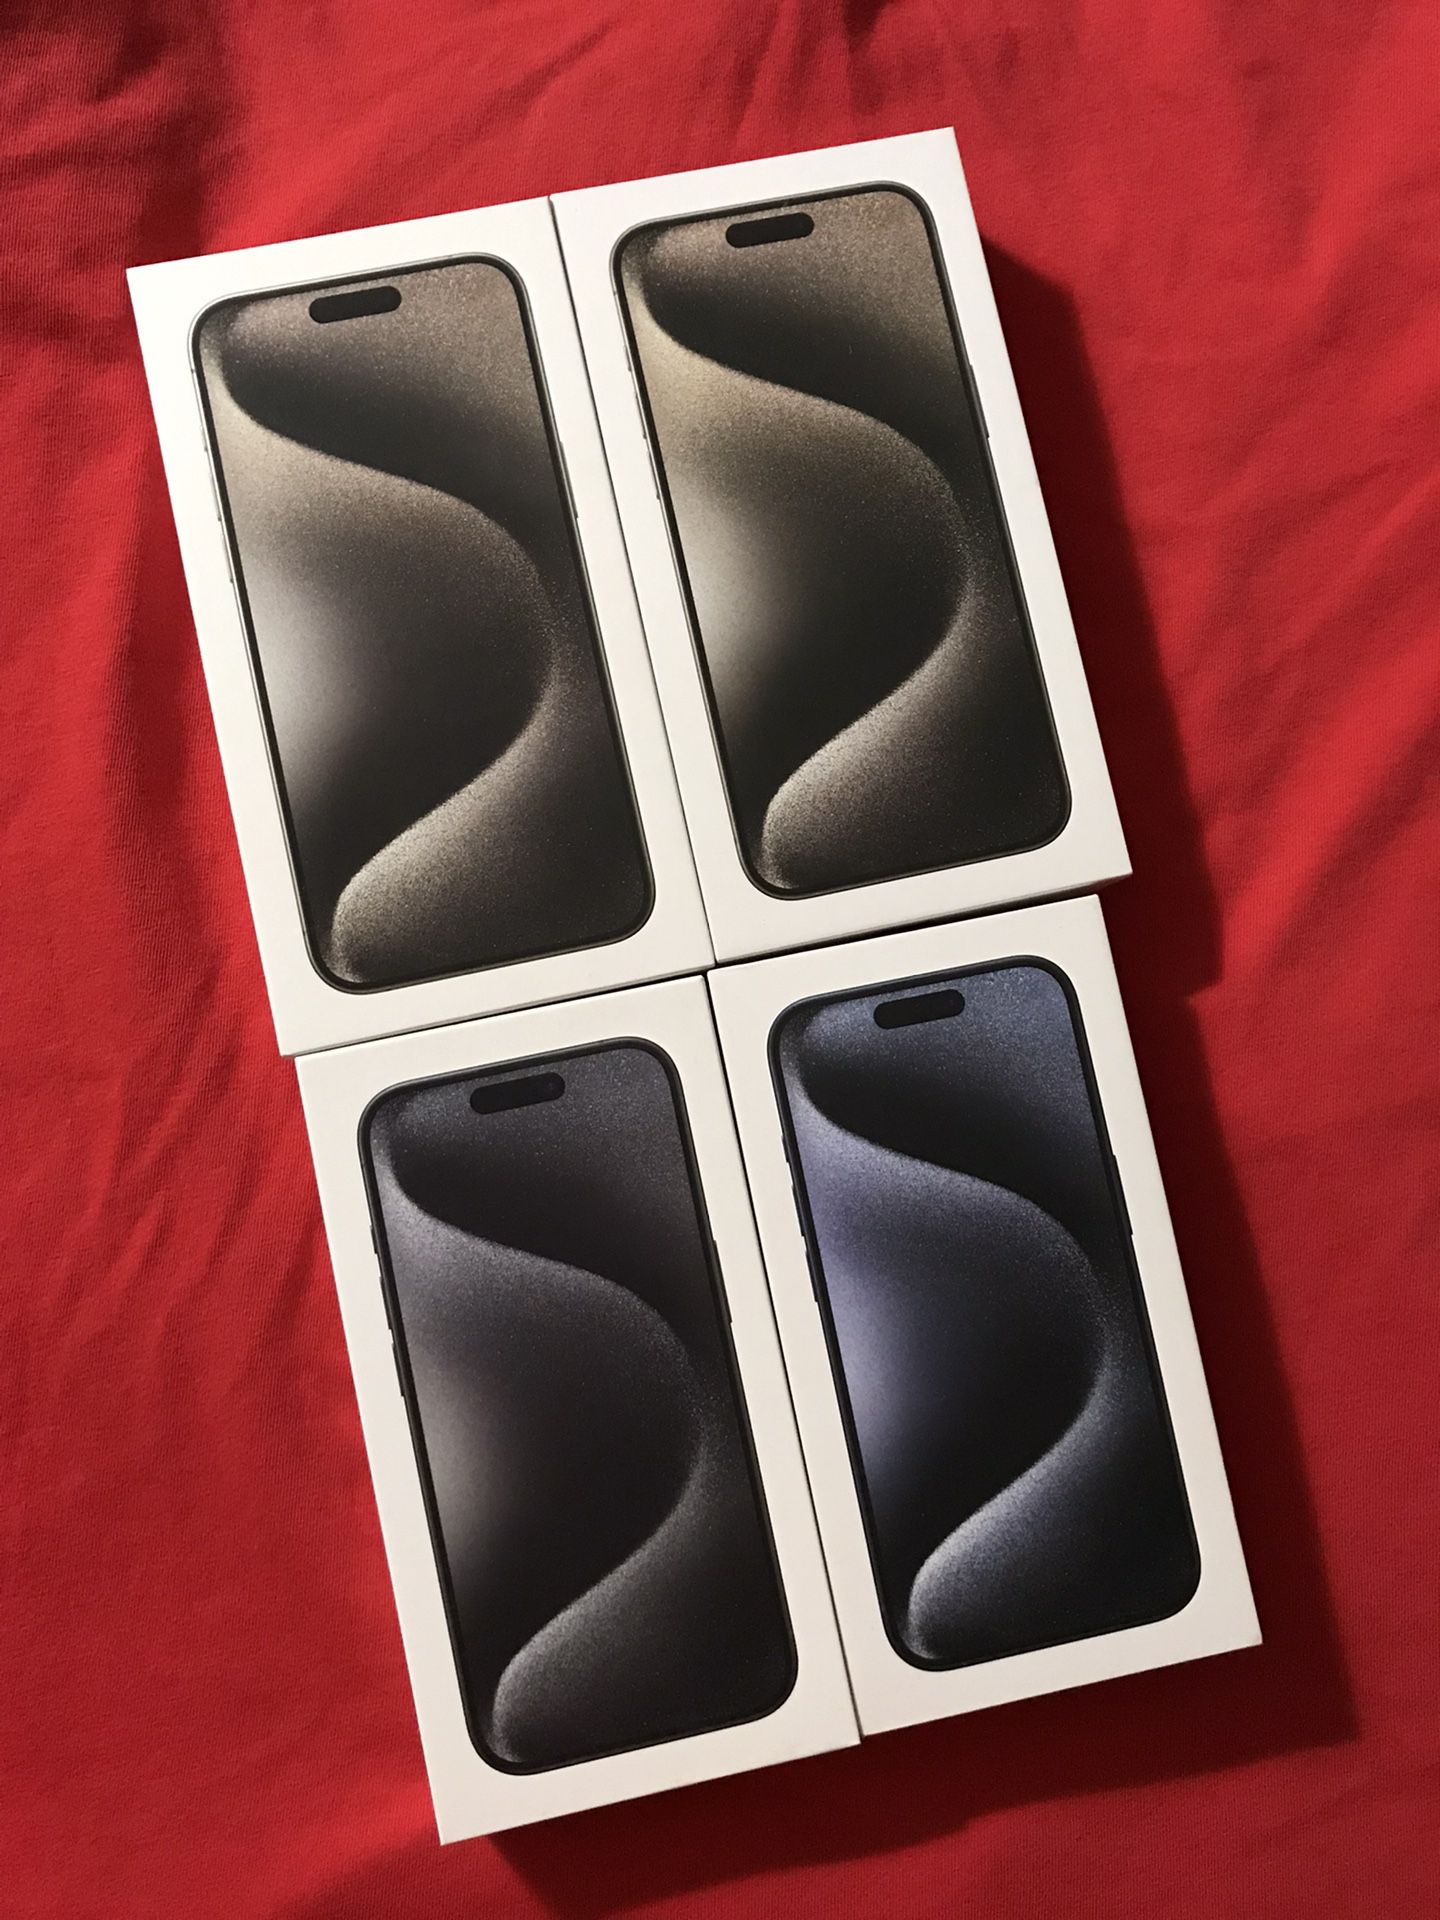 Unlocked Apple iPhone 15 Pro Max Natural 256gb $1300 Or 512gb $1500 Or iPhone 15 Pro Blue Or Black 256gb $1200 Unlocked  I Can Meet You Today 